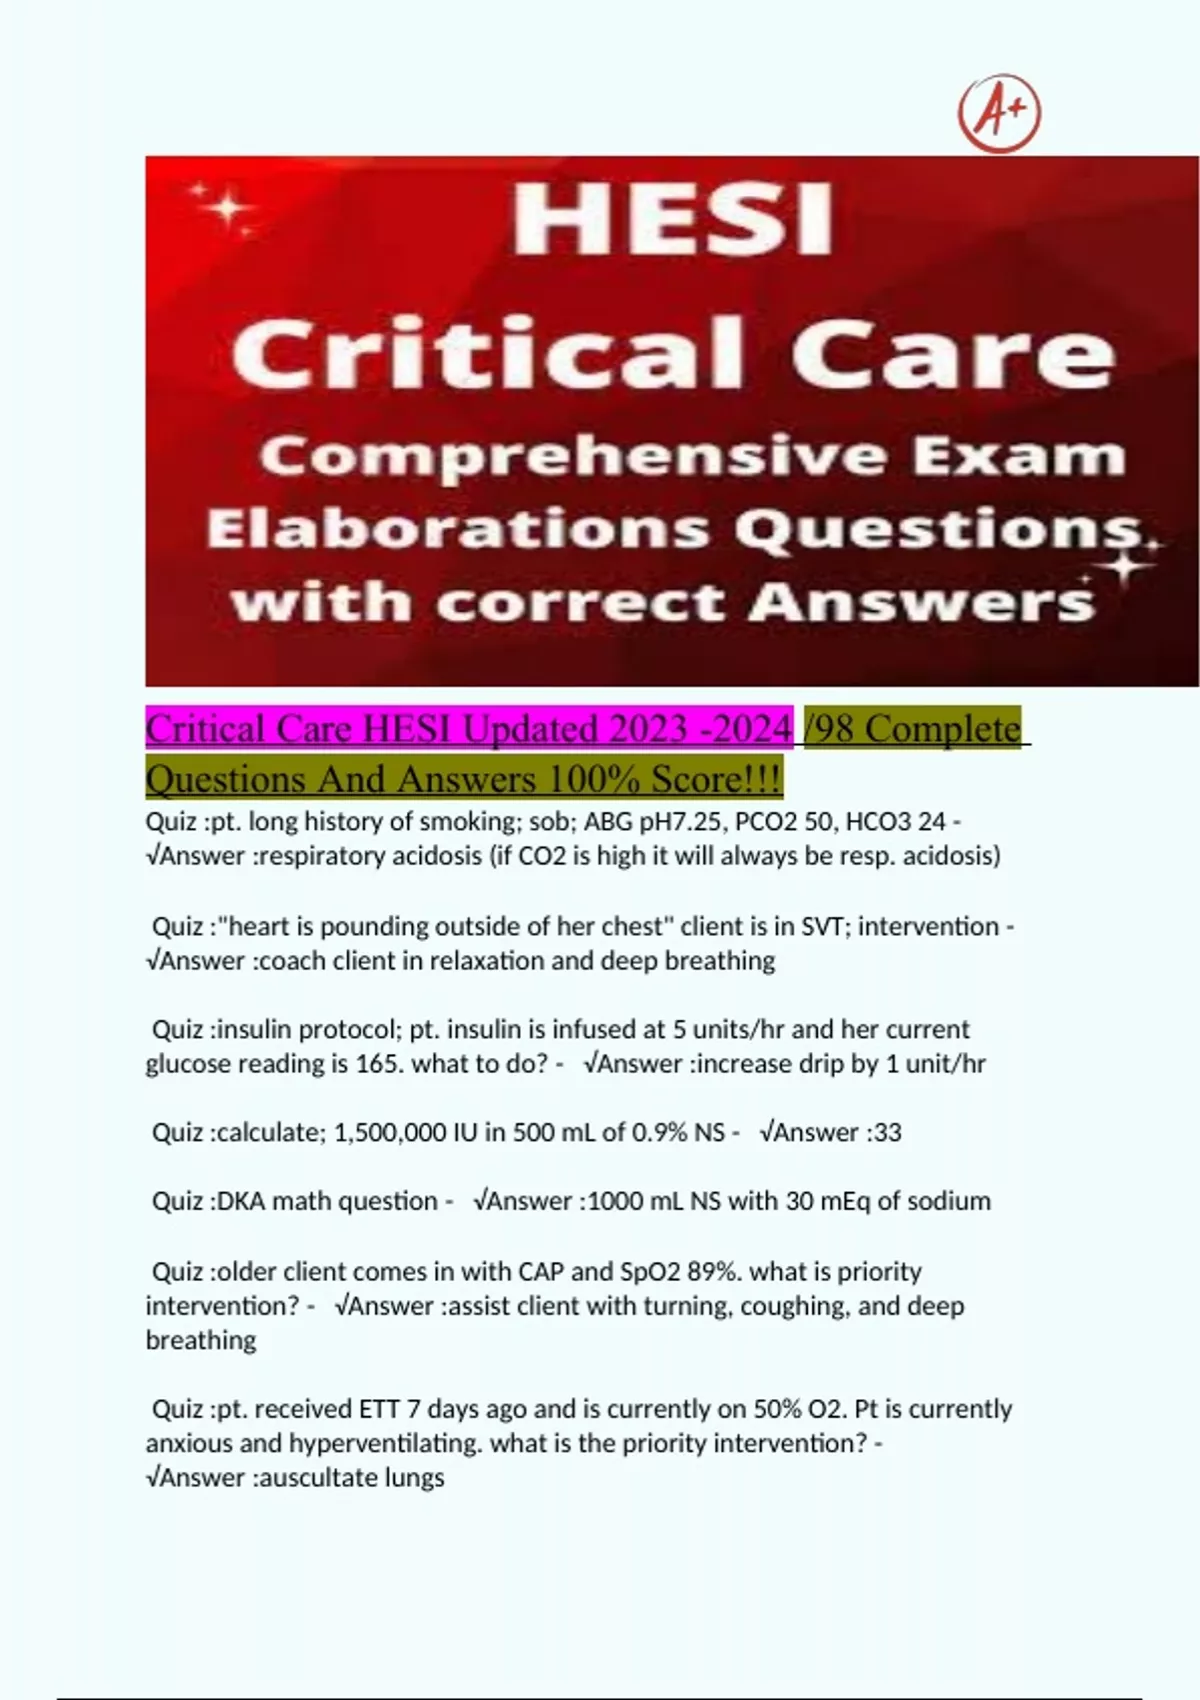 Critical Care HESI Updated /98 Complete Questions And Answers 100